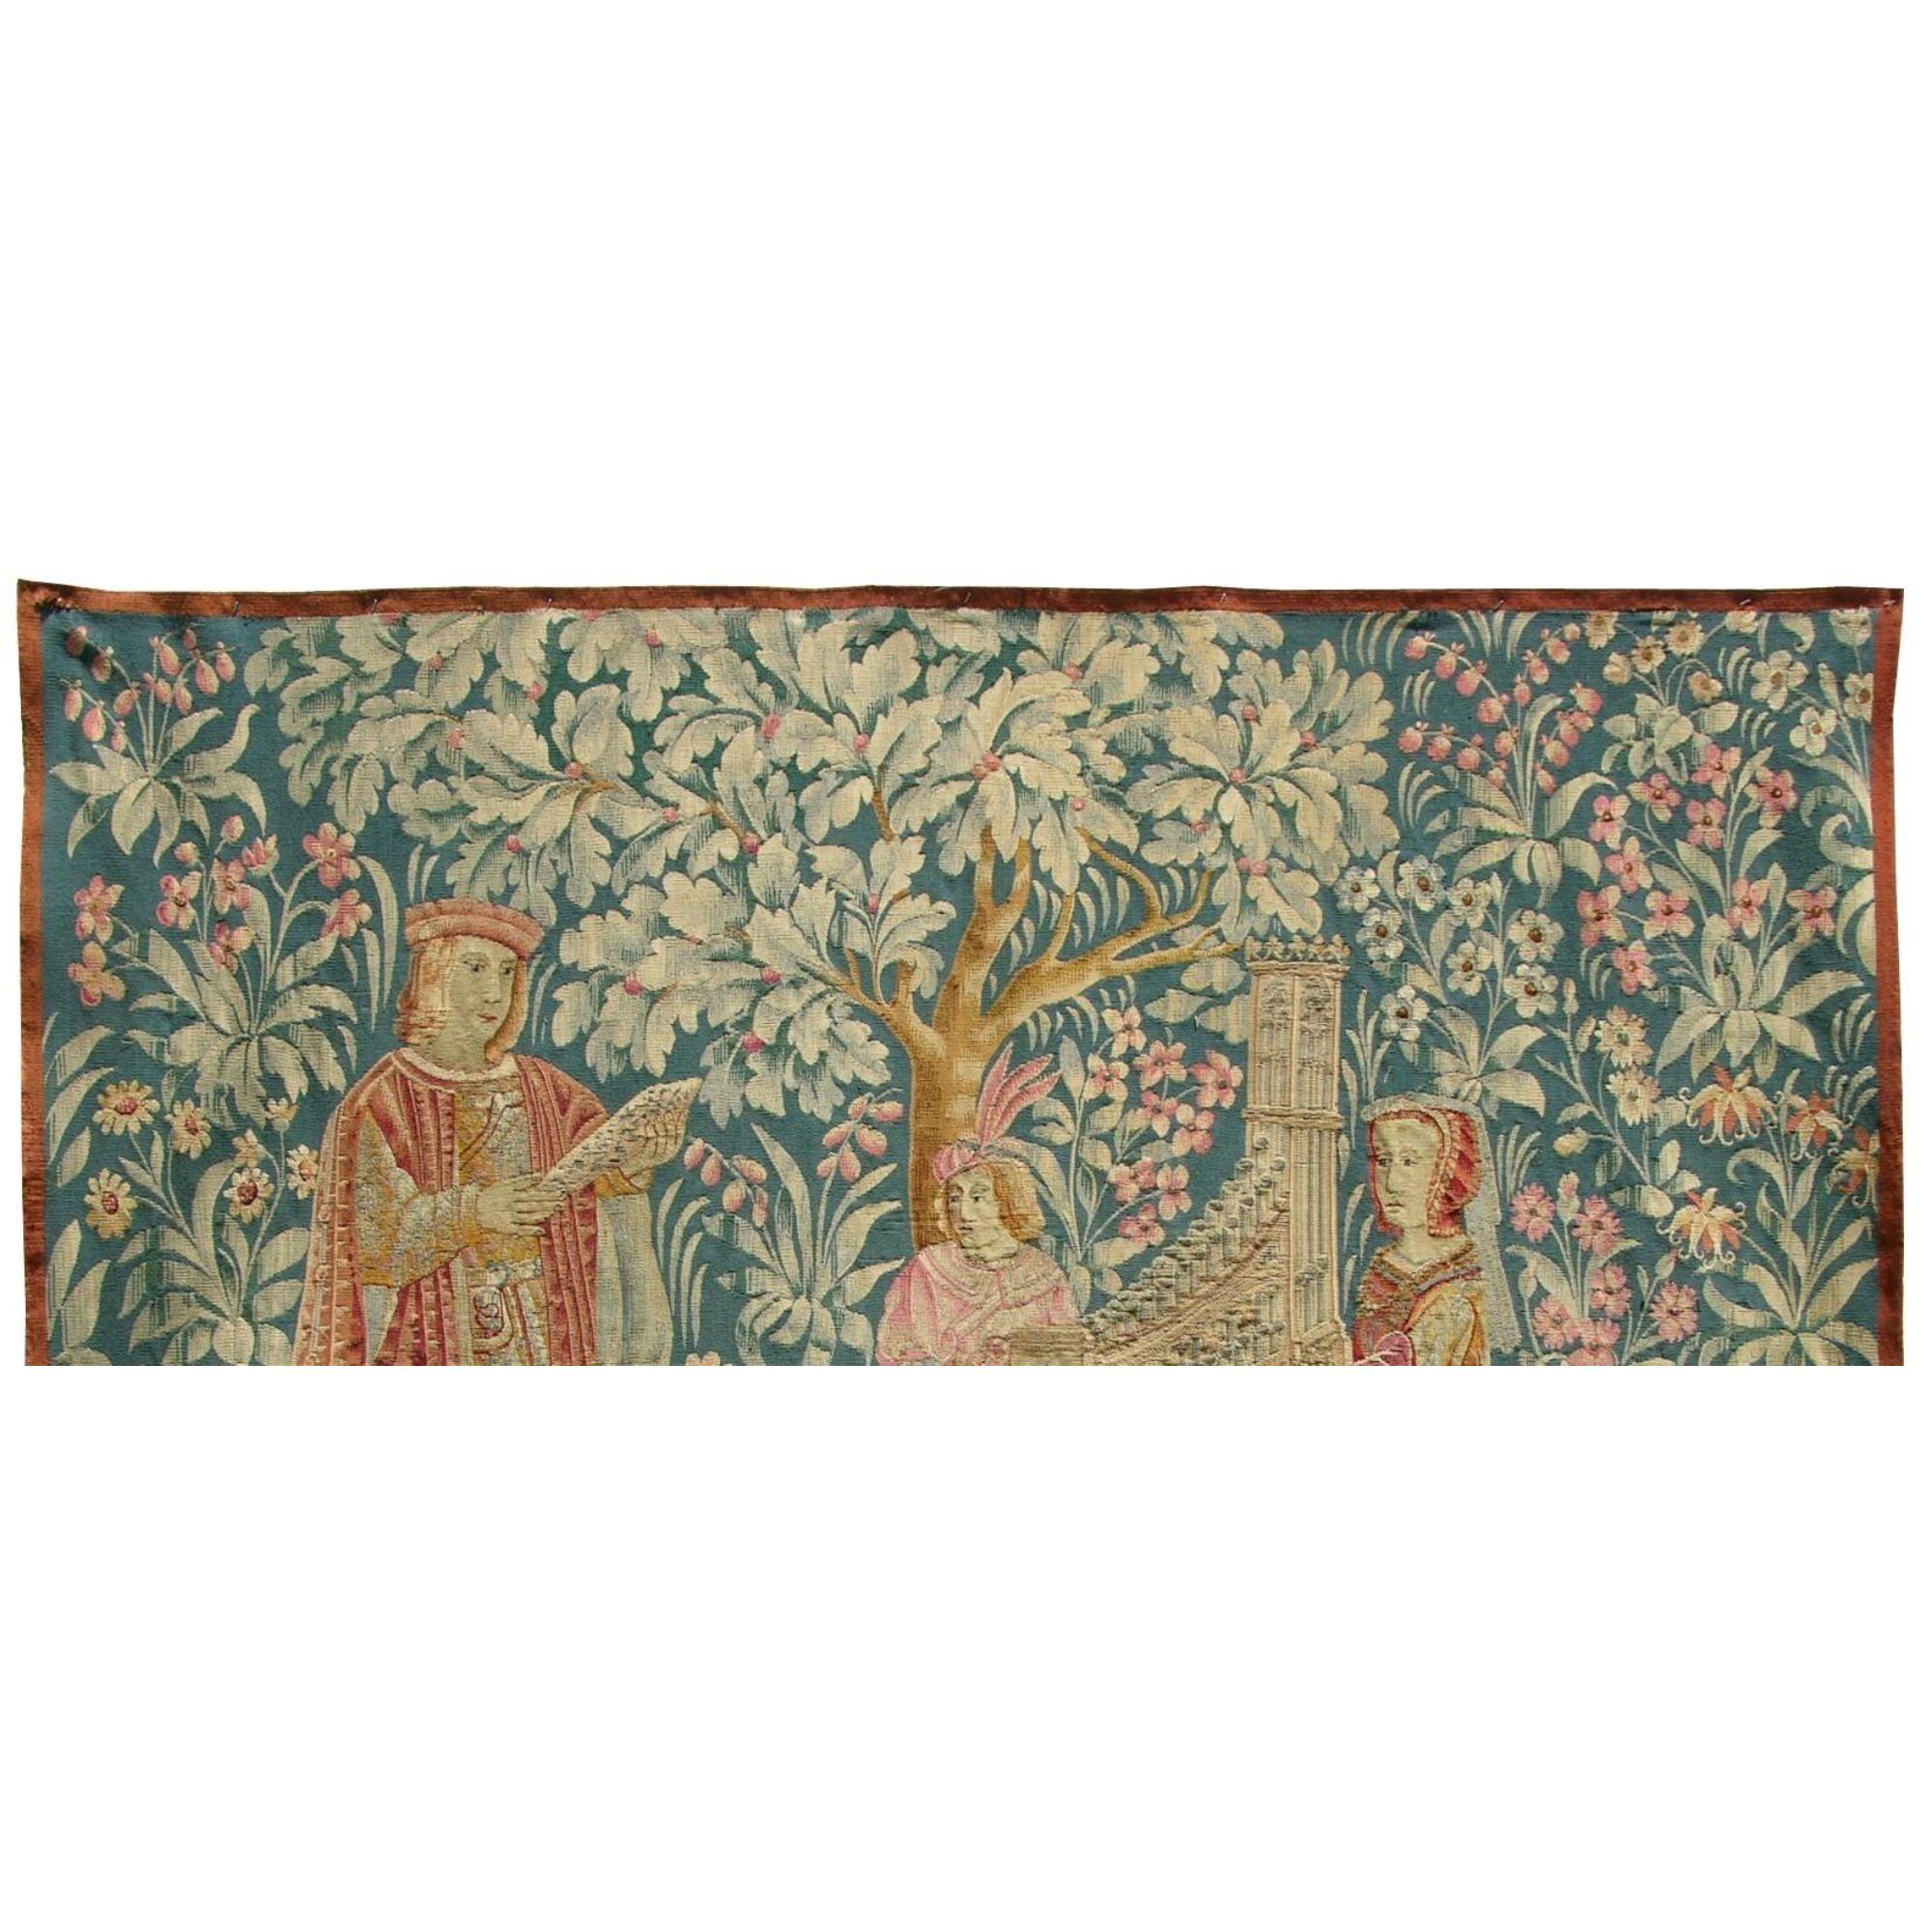 Unknown Antique 19th Century Flrmish Tapestry 5'7